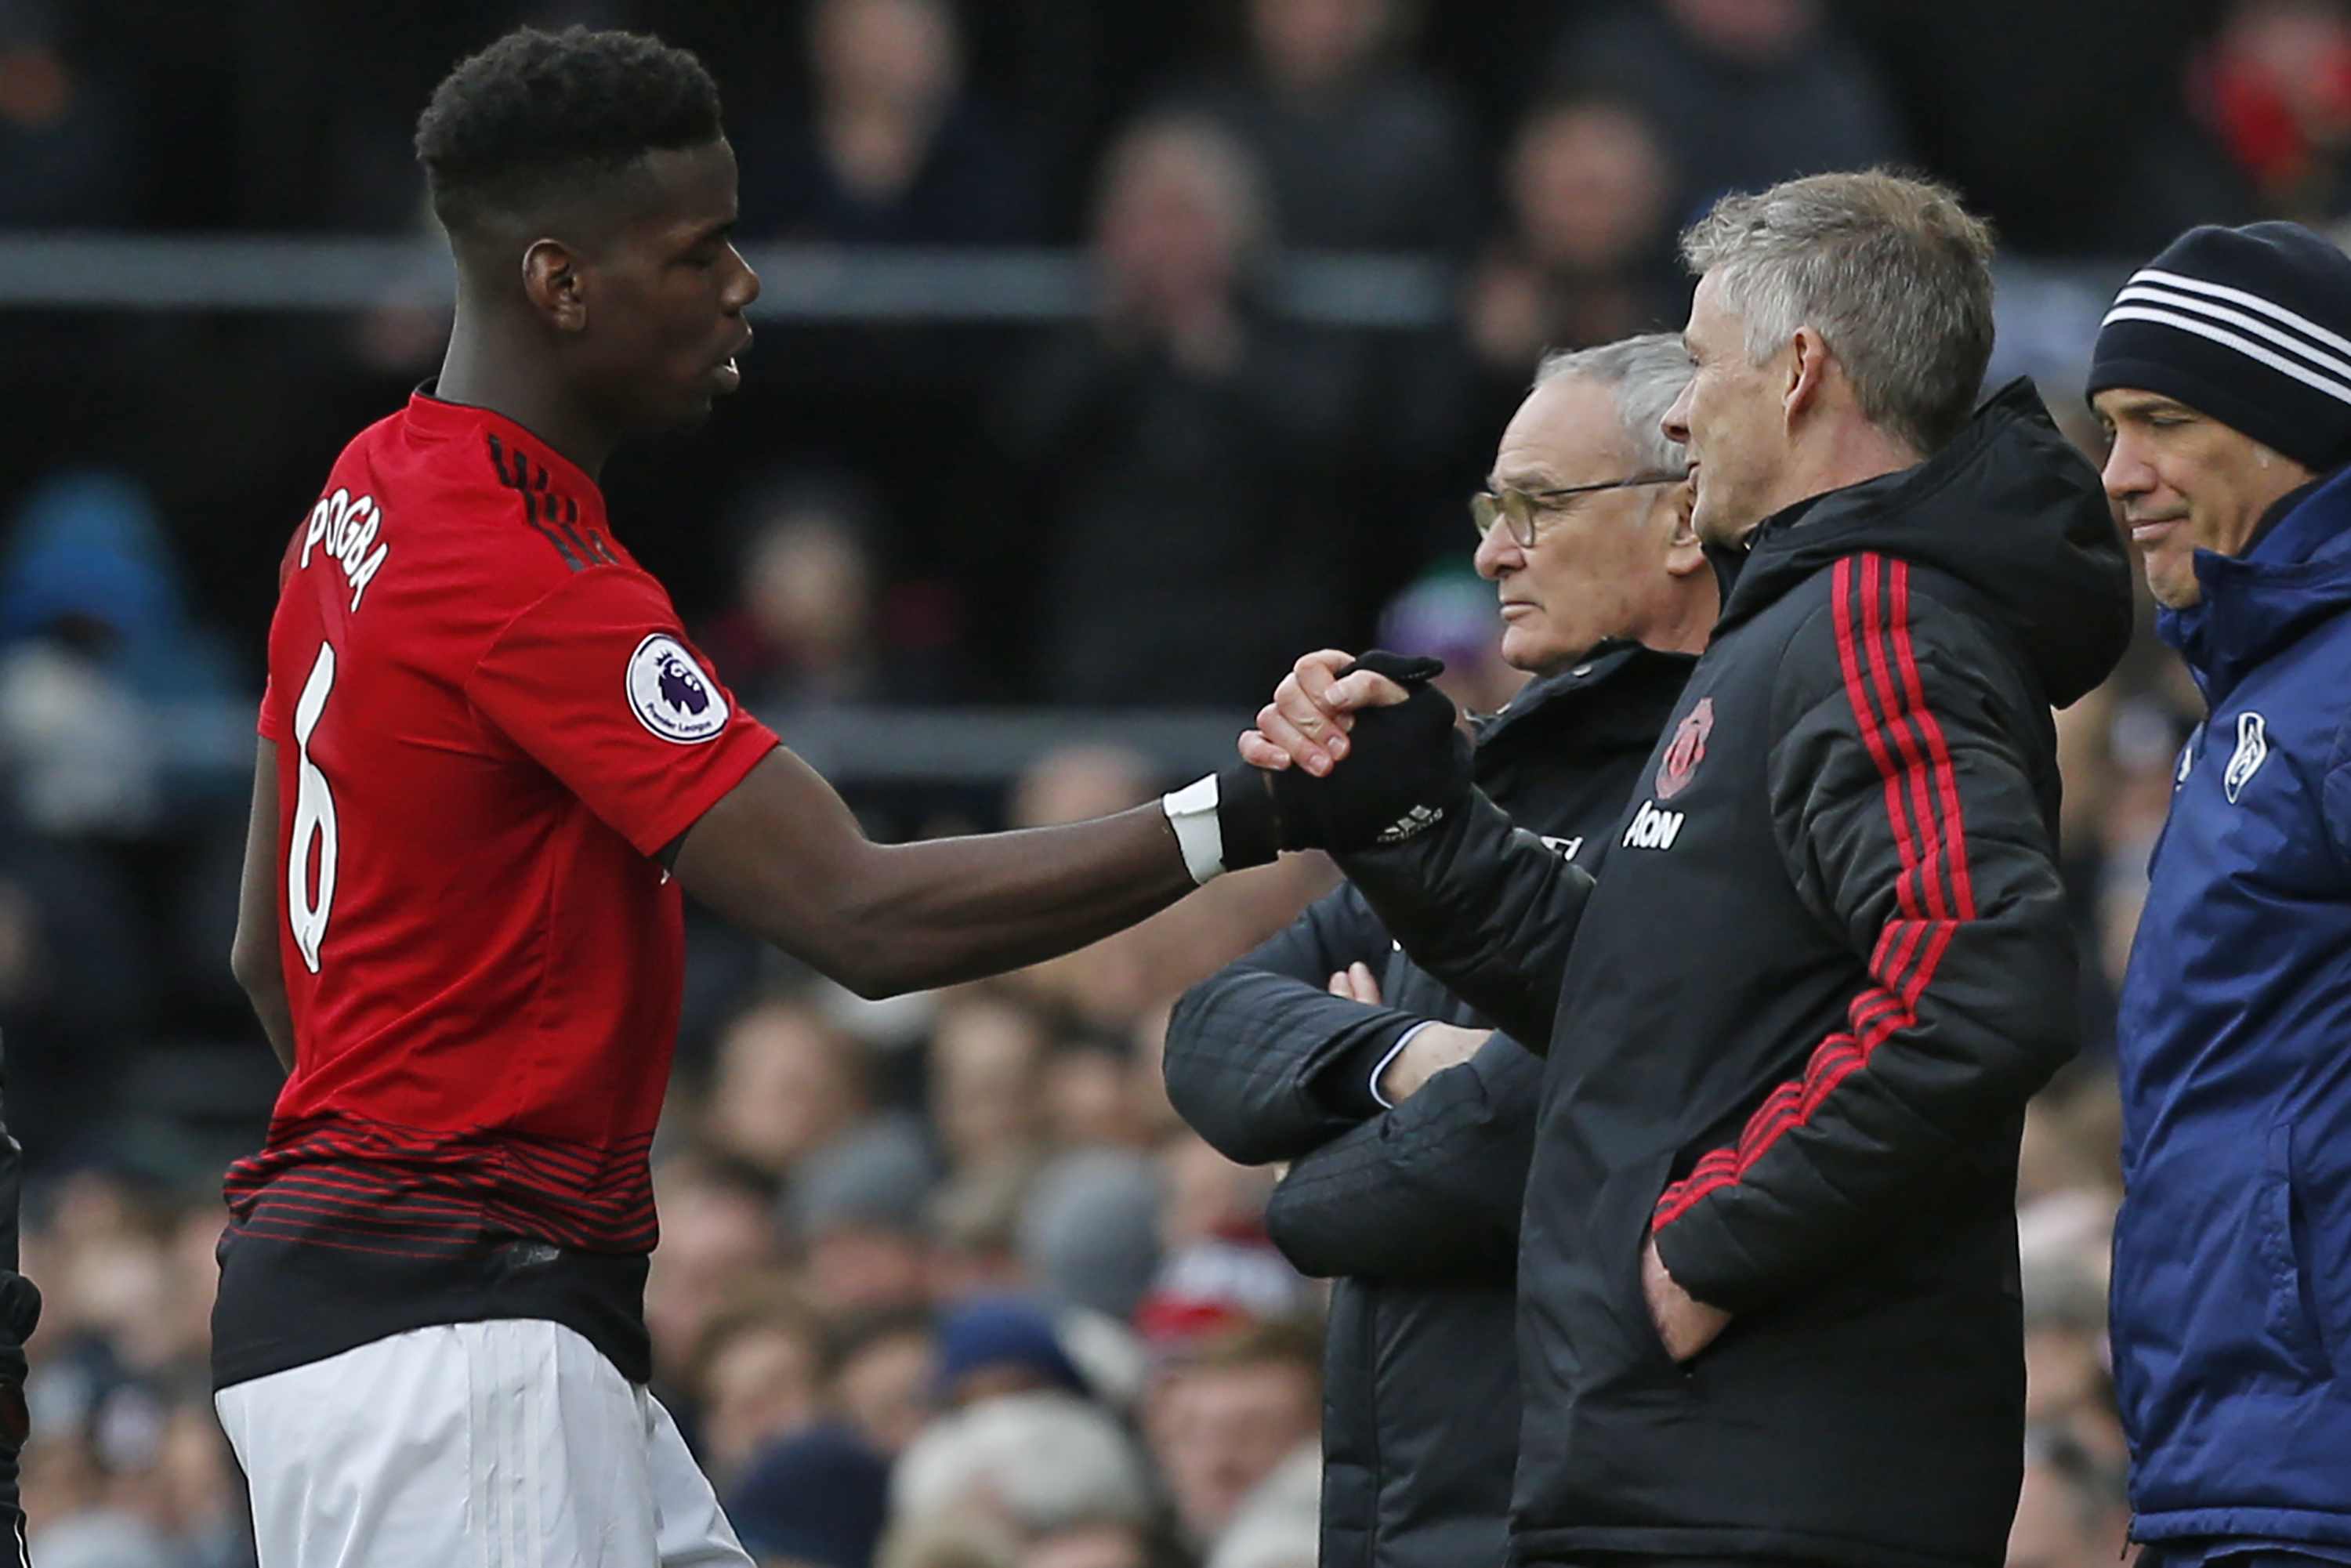 Manchester United's French midfielder Paul Pogba (L) shakes hands with Manchester United's  Norwegian caretaker manager Ole Gunnar Solskjaer after being substituted during the English Premier League football match between Fulham and Manchester United at Craven Cottage in London on February 9, 2019. (Photo by Ian KINGTON / AFP) / RESTRICTED TO EDITORIAL USE. No use with unauthorized audio, video, data, fixture lists, club/league logos or 'live' services. Online in-match use limited to 120 images. An additional 40 images may be used in extra time. No video emulation. Social media in-match use limited to 120 images. An additional 40 images may be used in extra time. No use in betting publications, games or single club/league/player publications. /         (Photo credit should read IAN KINGTON/AFP/Getty Images)